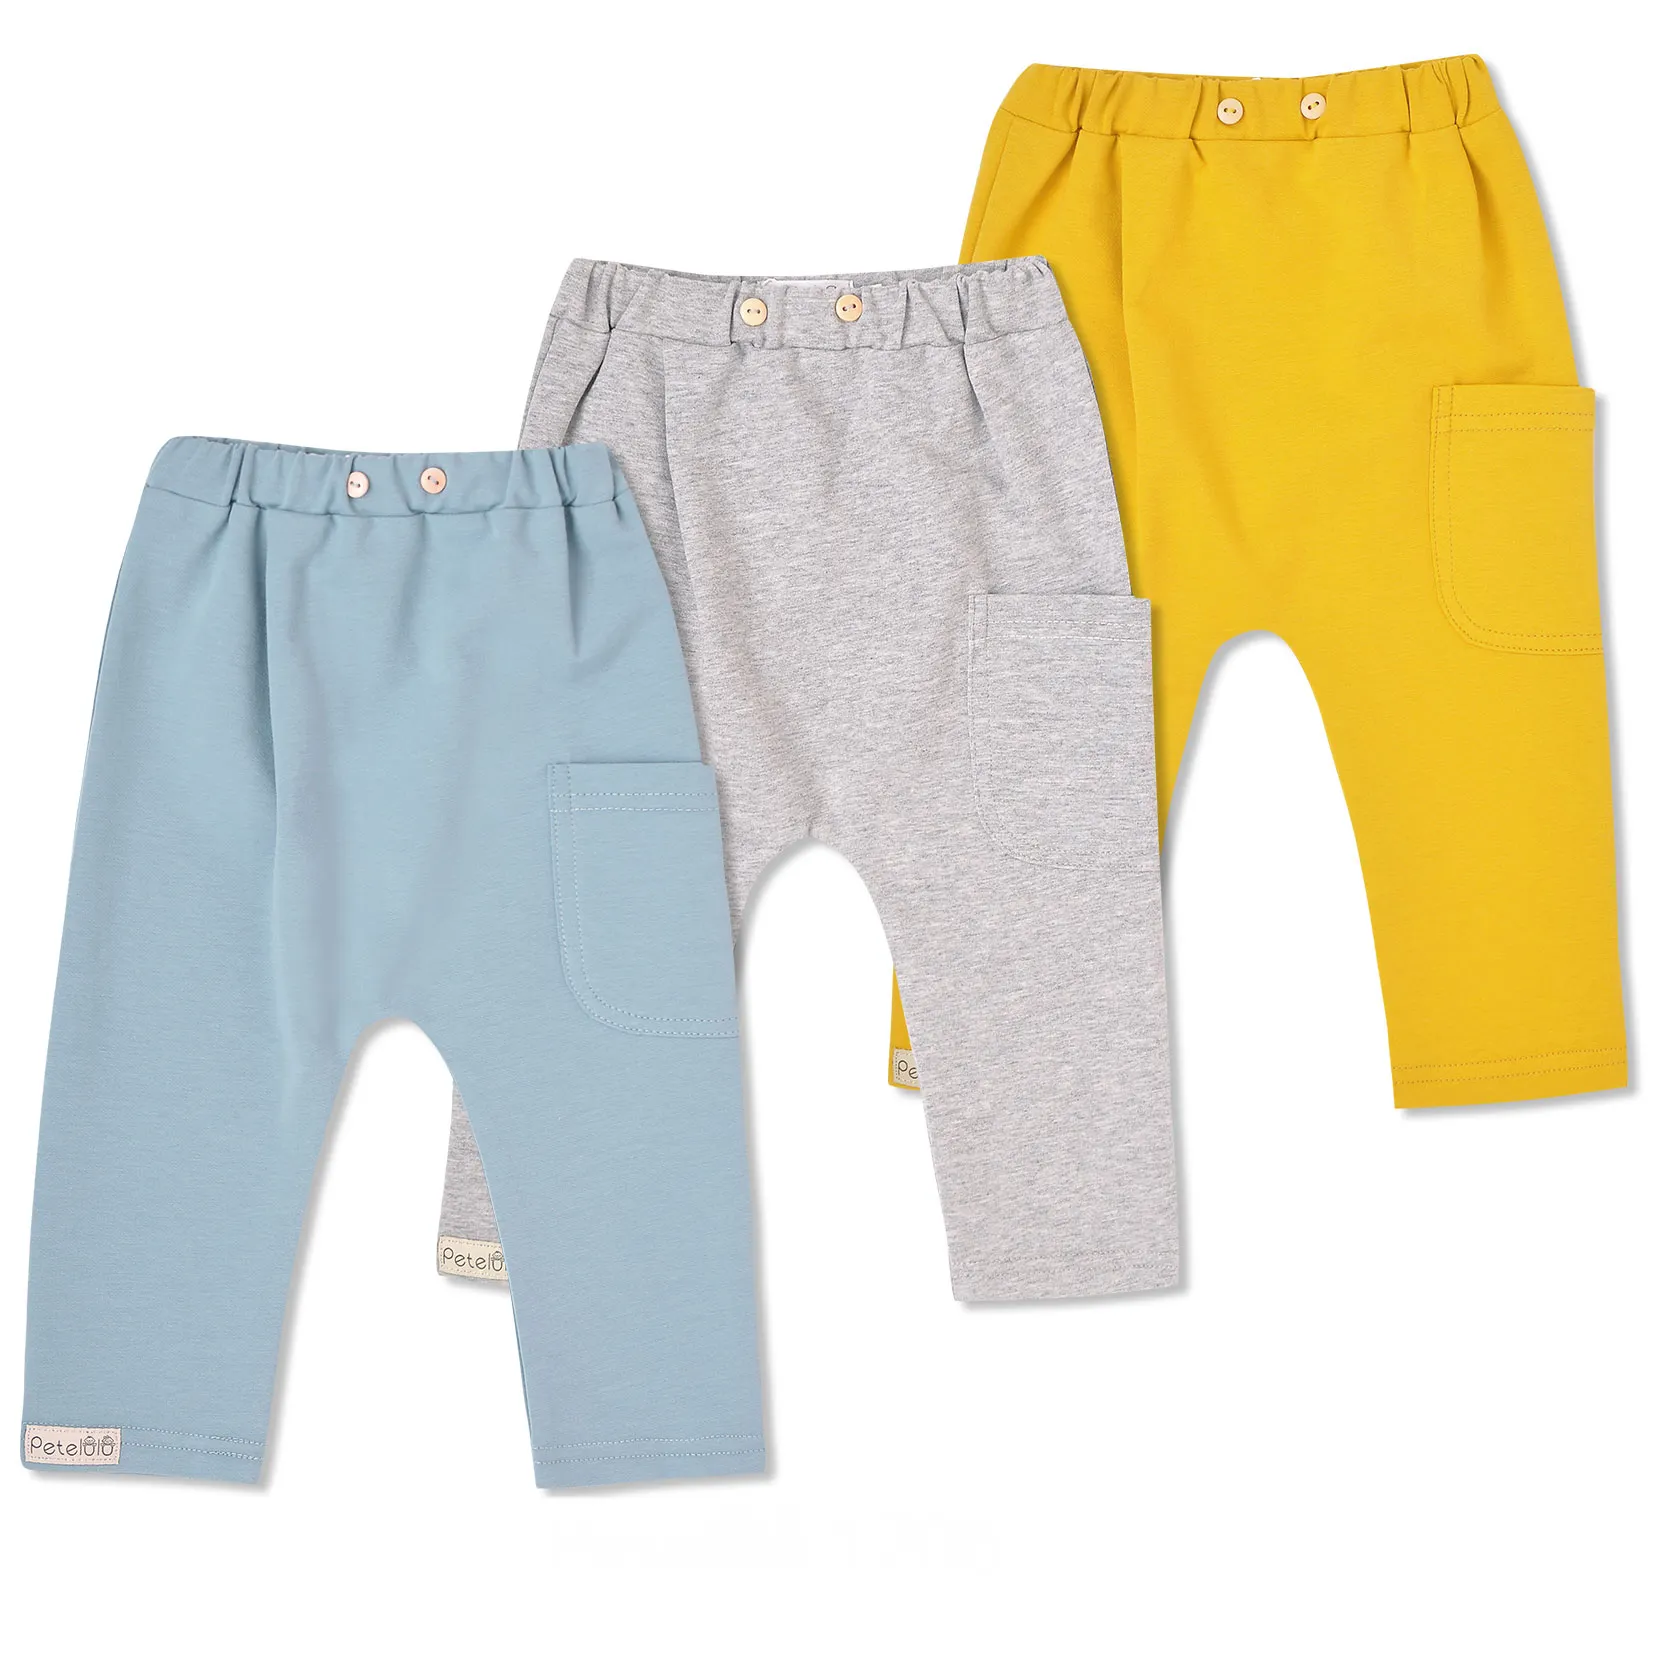 Petelulu New Fashion Ribbed Cotton Girl Boy Baby Pants Fit For Kids Trousers 1 pack MOQ 3 Sizes